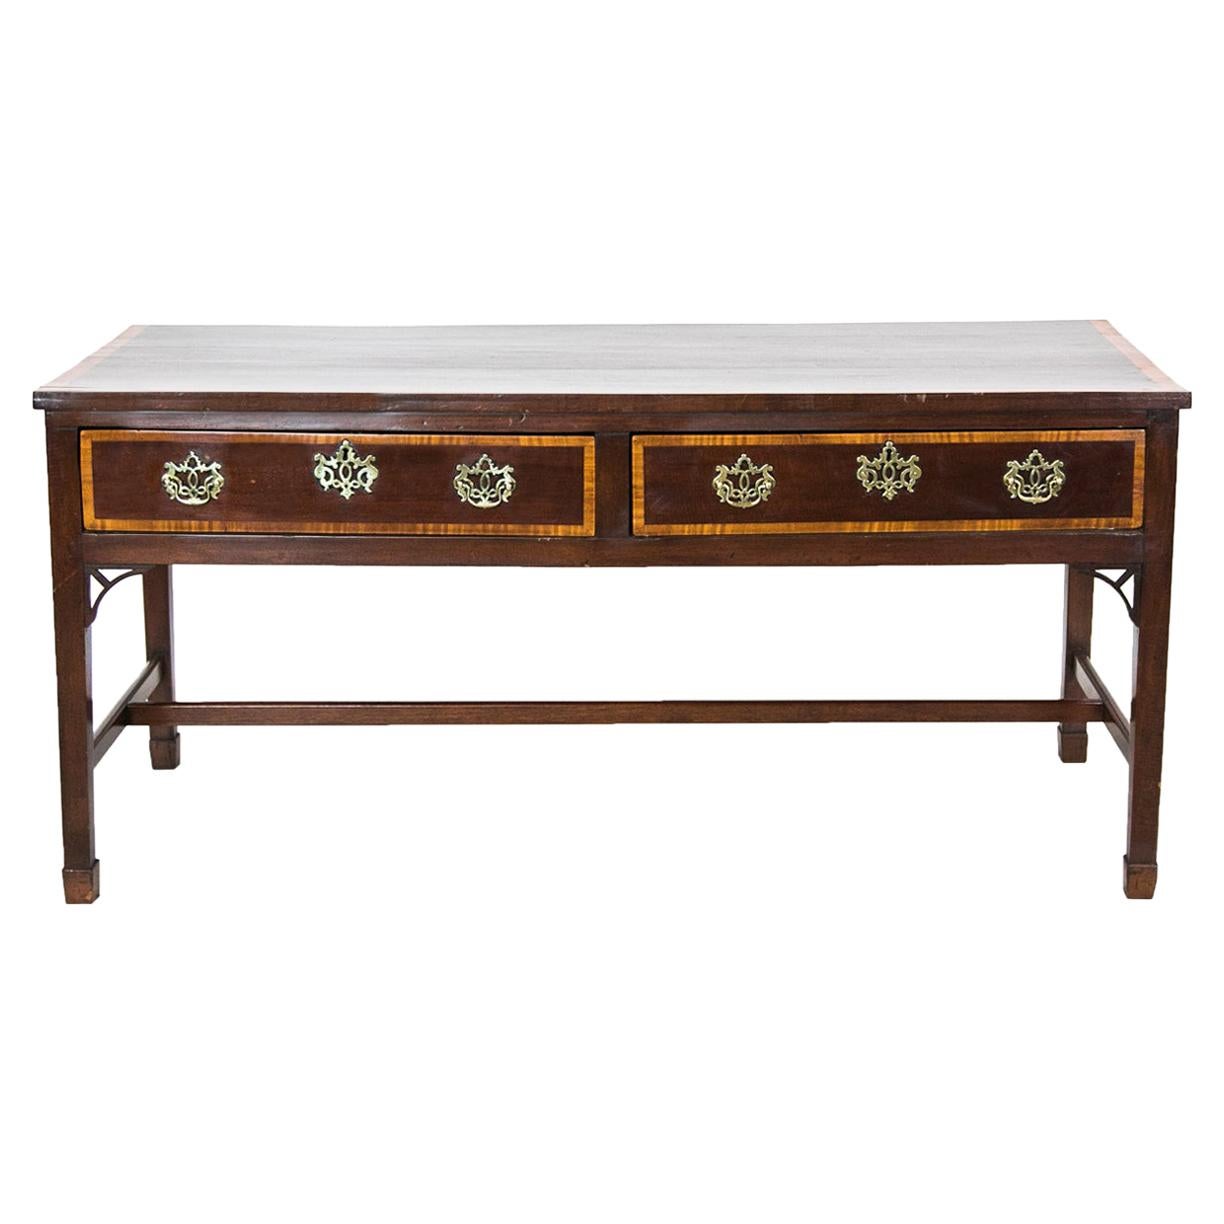 English Chippendale Console Table